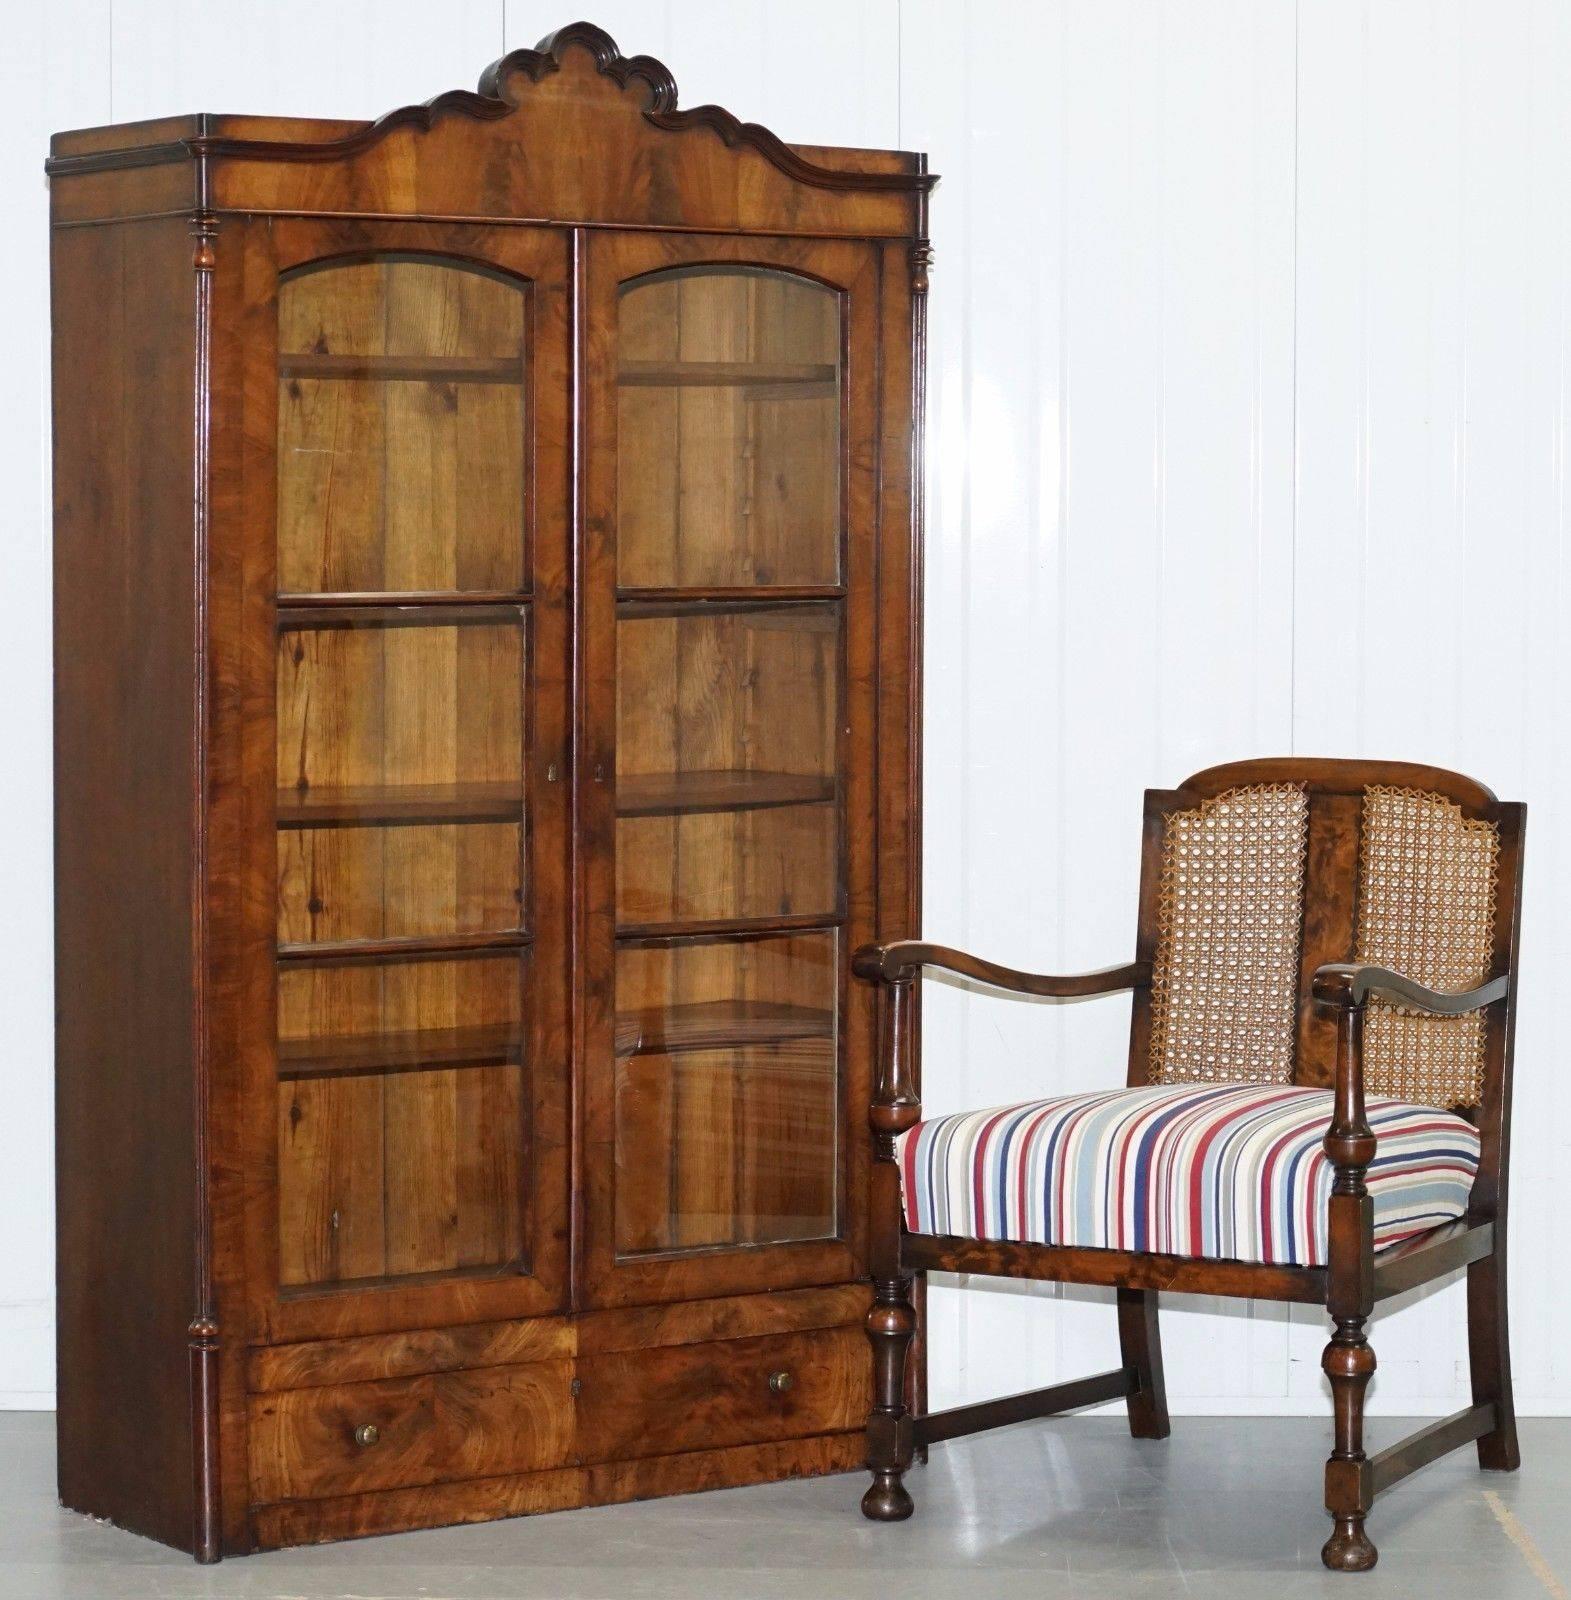 We are delighted to offer for sale this stunning Regency circa 1815 mahogany hand signed in pencil arched top bookcase display cabinet

An exceptionally good looking and well made period regency piece, the quality is just exquisite, it’s been hand